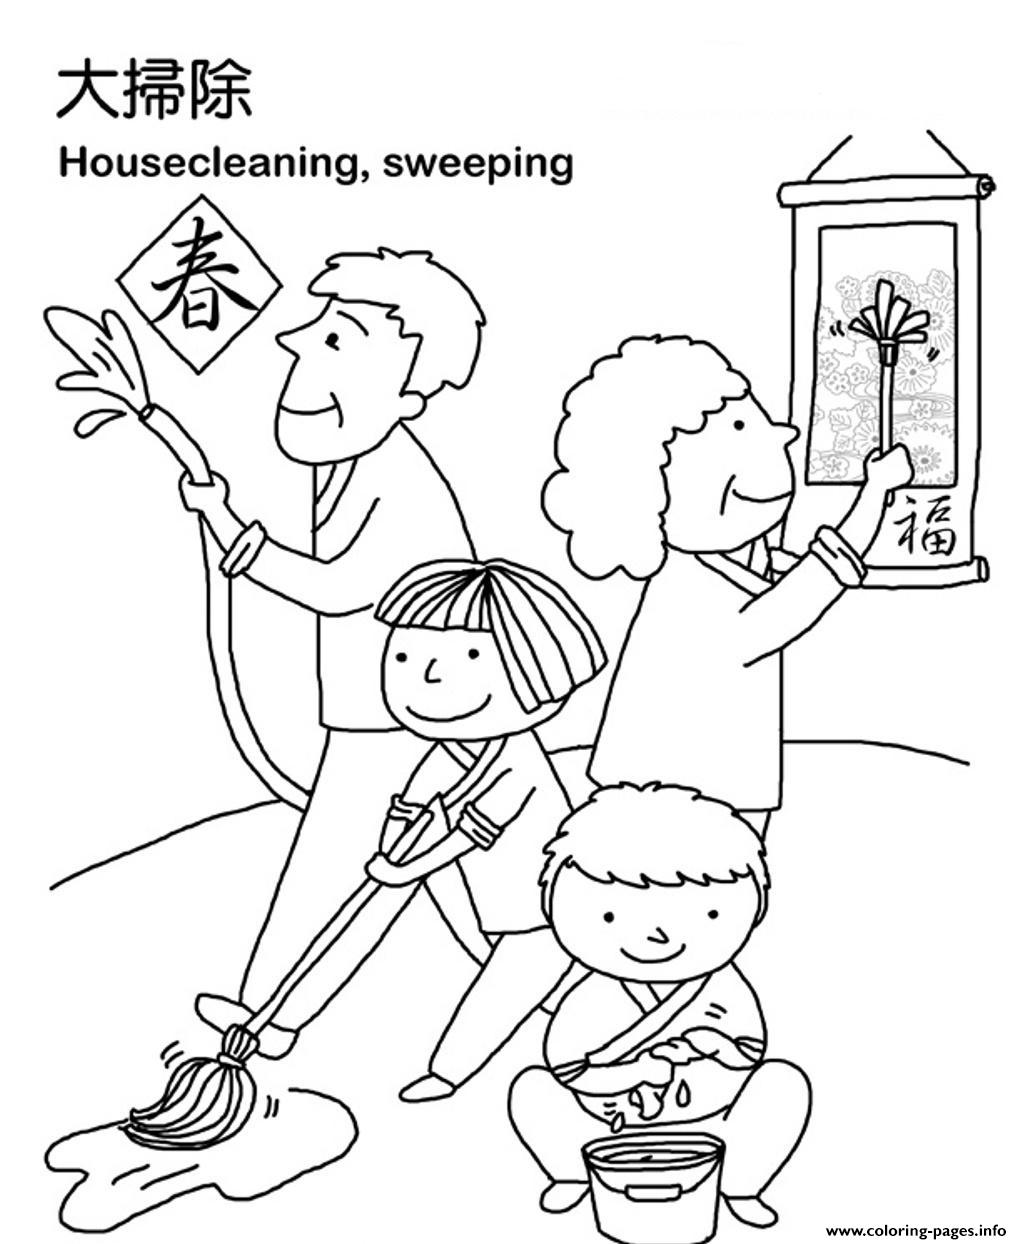 Chinese New Year S Cleaning The Housec0e0 coloring